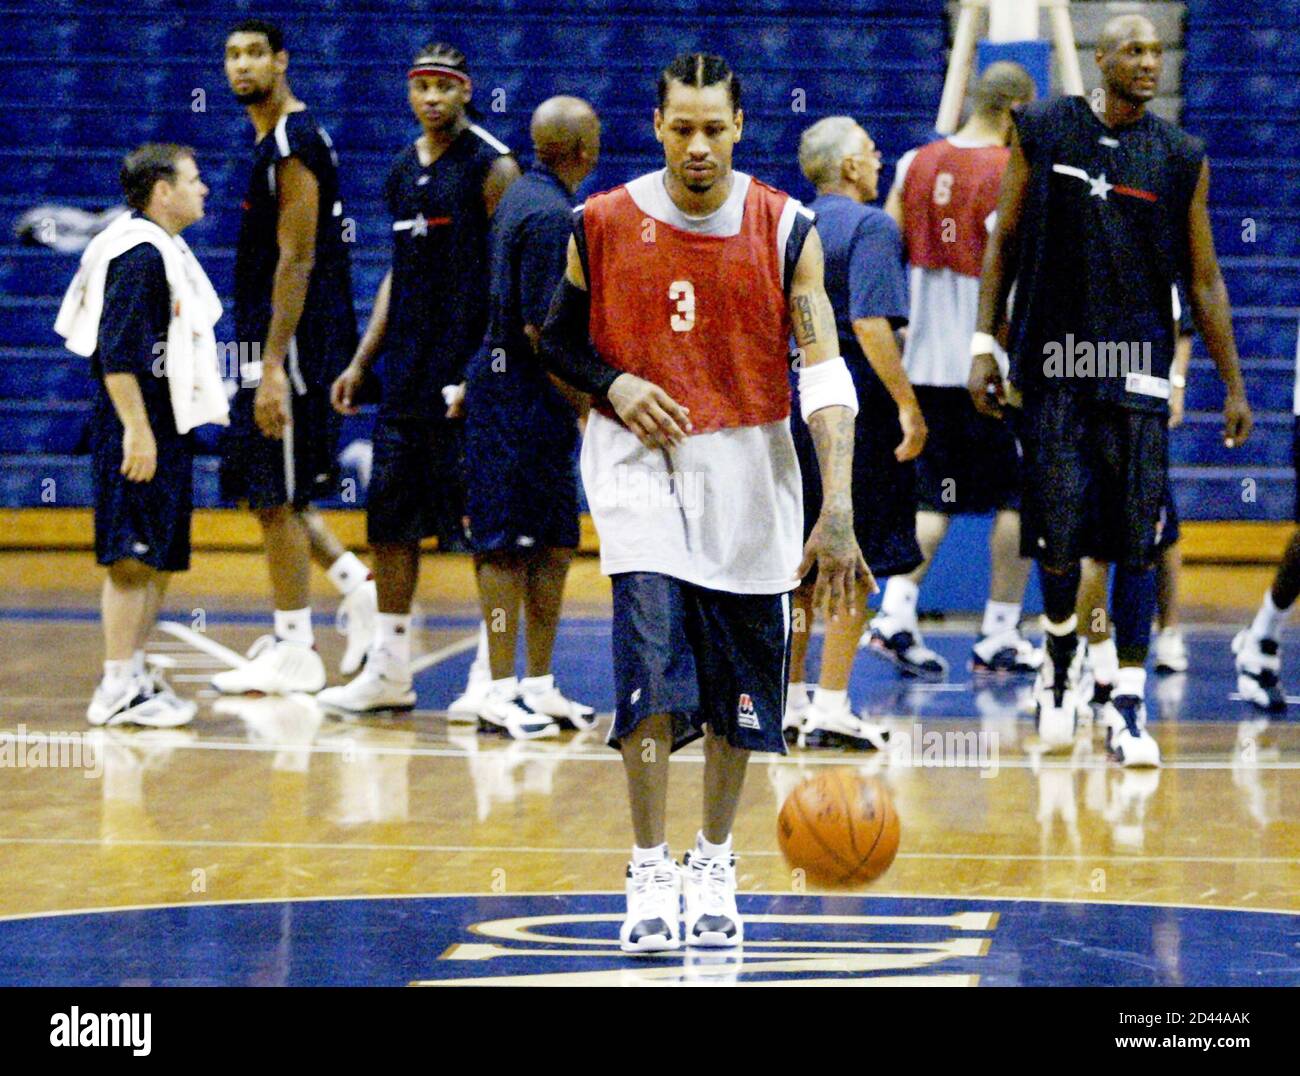 USA Olympic Men's Basketball Team member Iverson breaks away during  practice at the University of North Florida. USA Olympic Men's Basketball  player Allen Iverson from the Philadelphia 76ers breaks away during the